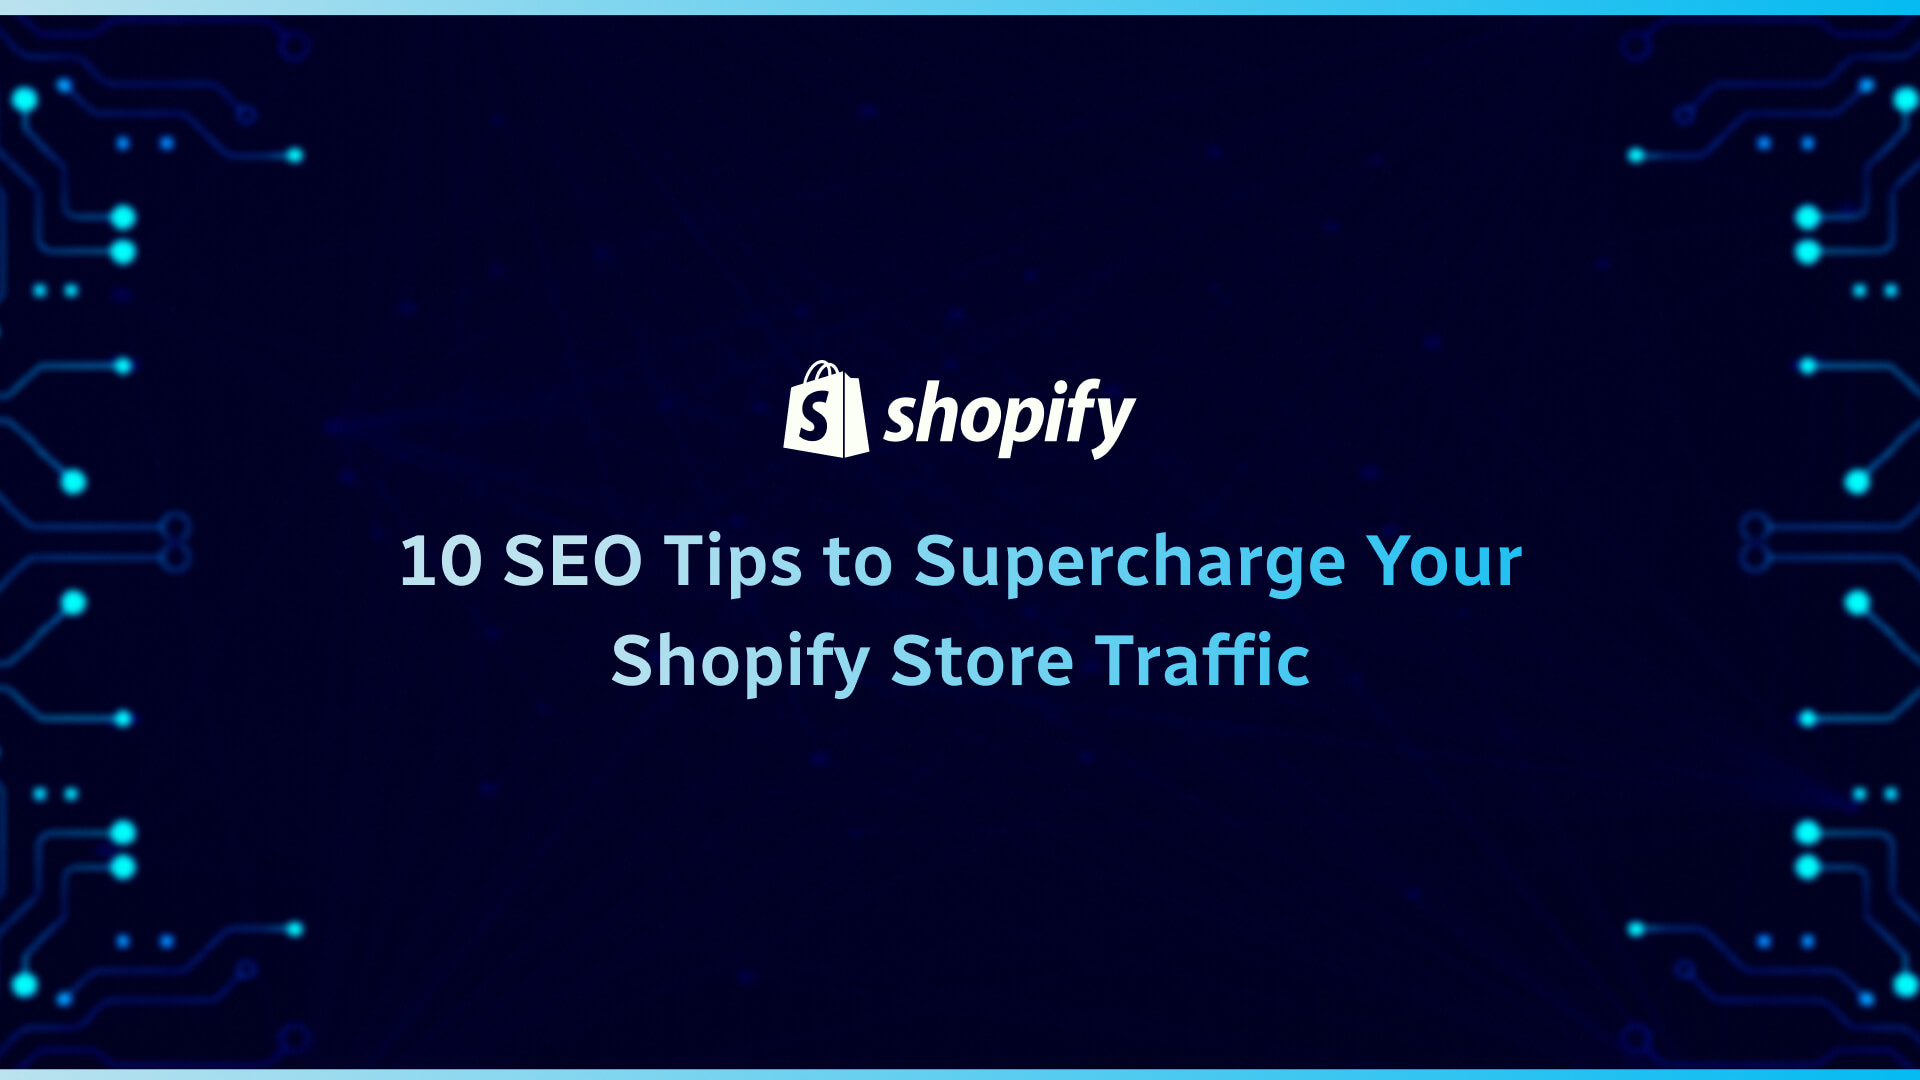 10 SEO Tips to Supercharge Your Shopify Store Traffic (1)